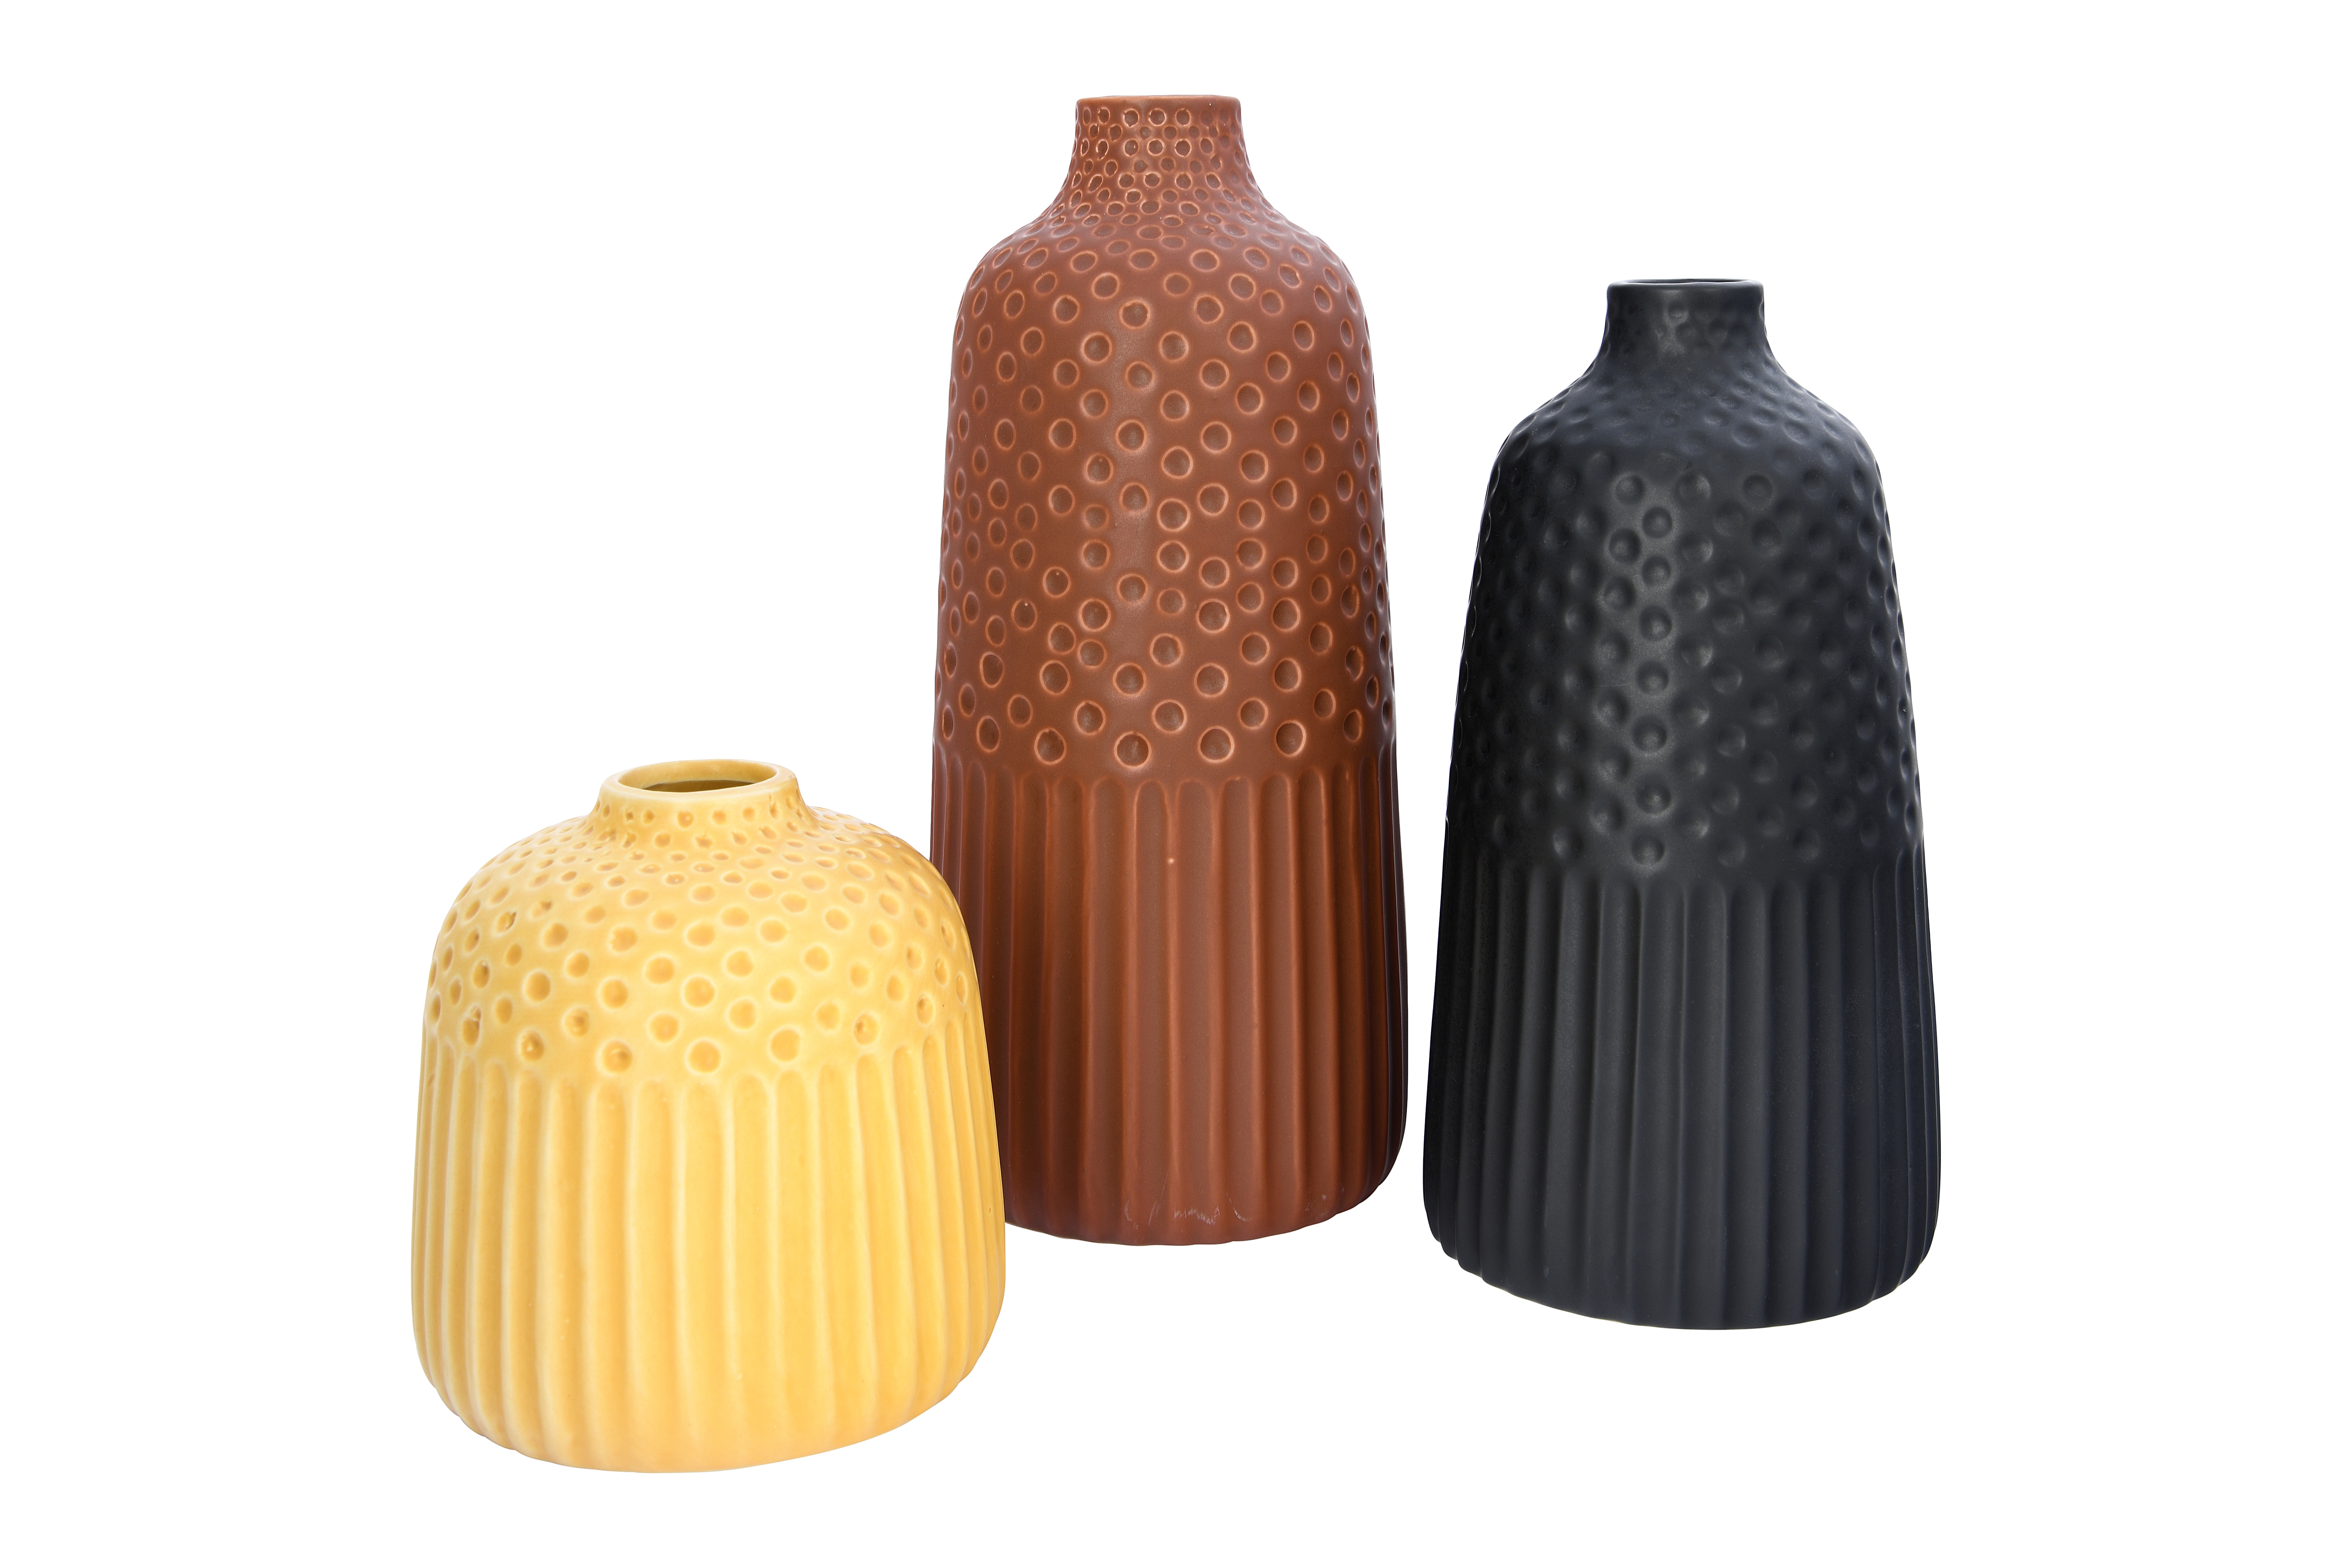 Embossed Stoneware Vases with Fluted & Polka Dot Designs (Set of 3 Sizes/Colors) - Nomad Home